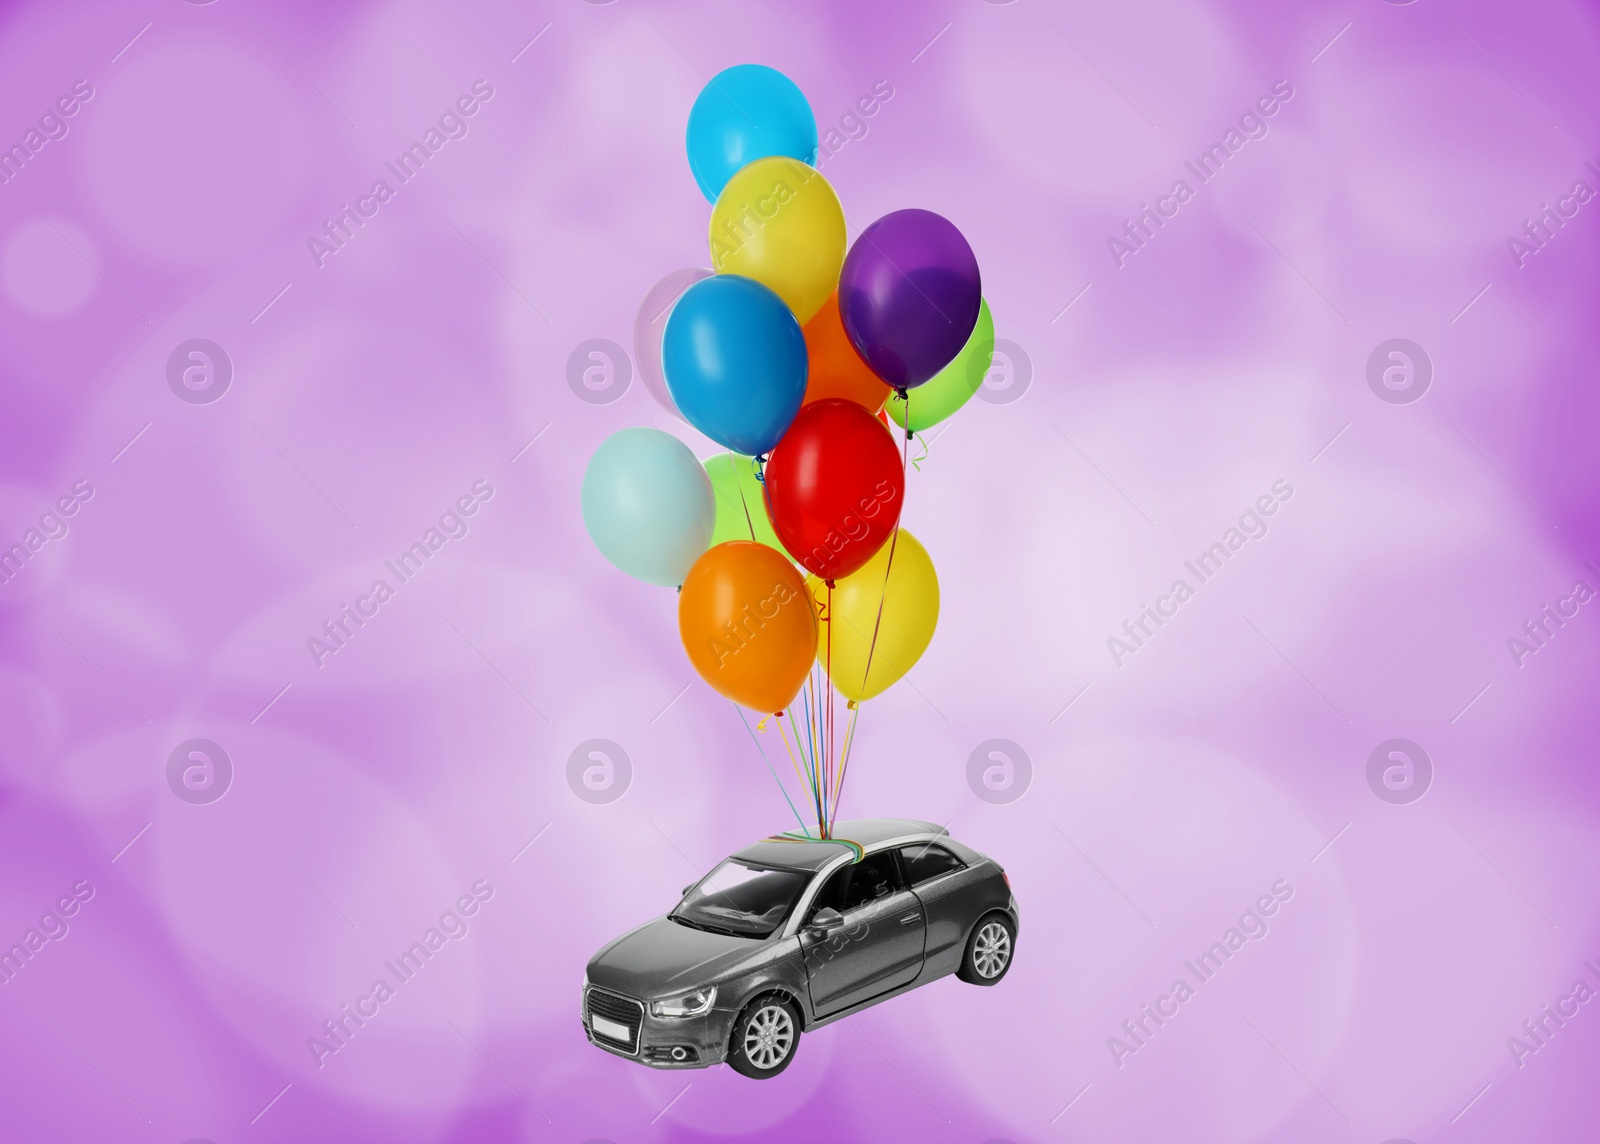 Image of Many balloons tied to toy car flying on magenta background